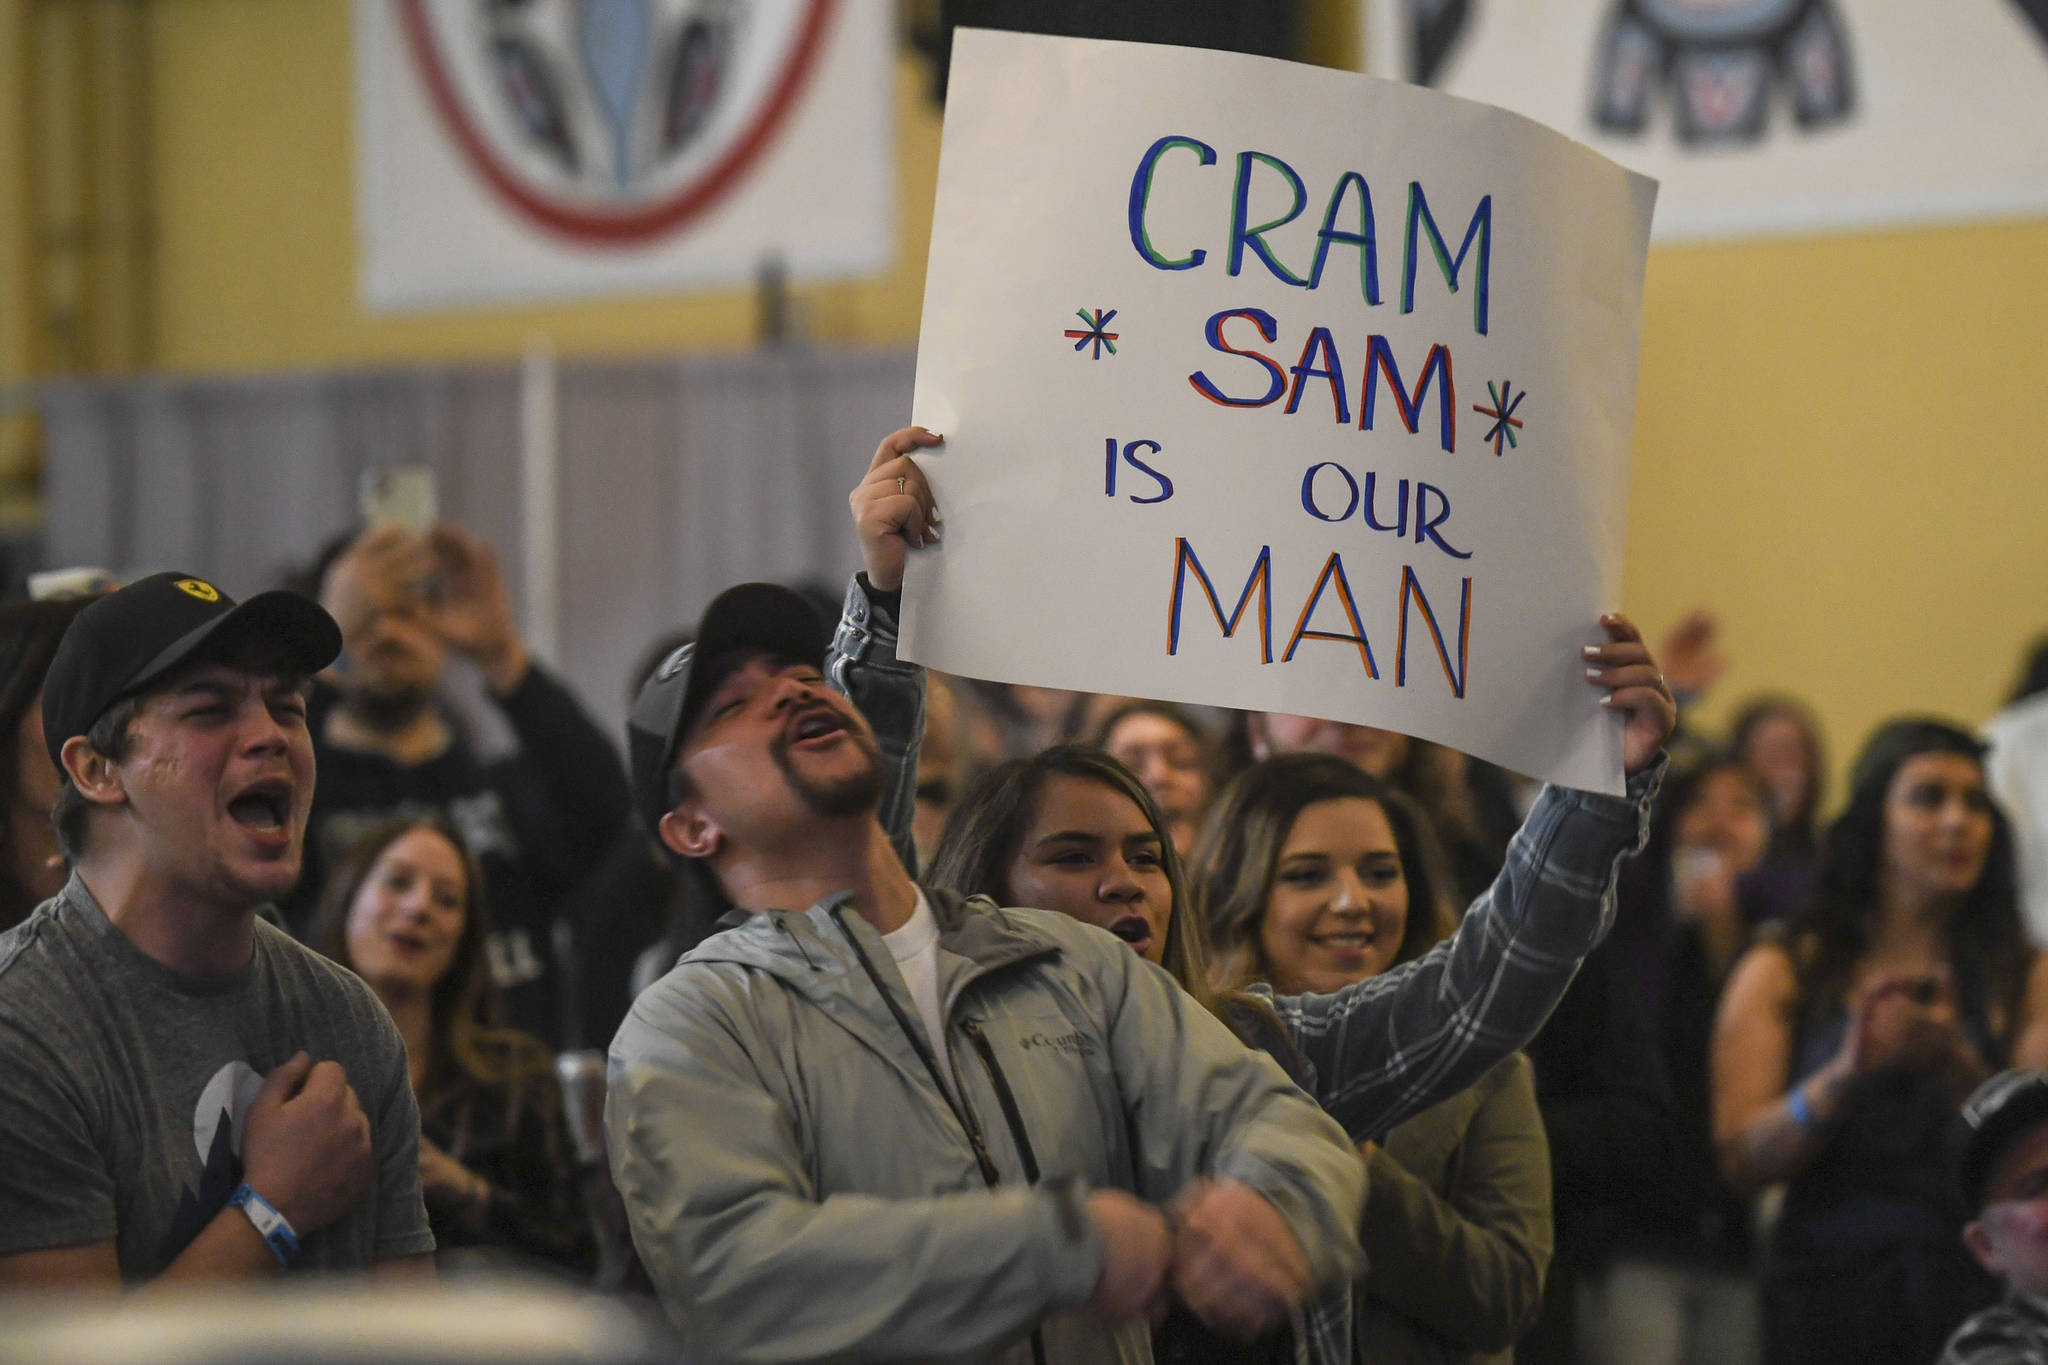 Fans of Cram Sam react during his performance at the the Killah Priest of Wu Tang Southeast Tour at the Juneau Arts & Culture Center on Friday, Dec. 20, 2019. (Michael Penn | Juneau Empire)